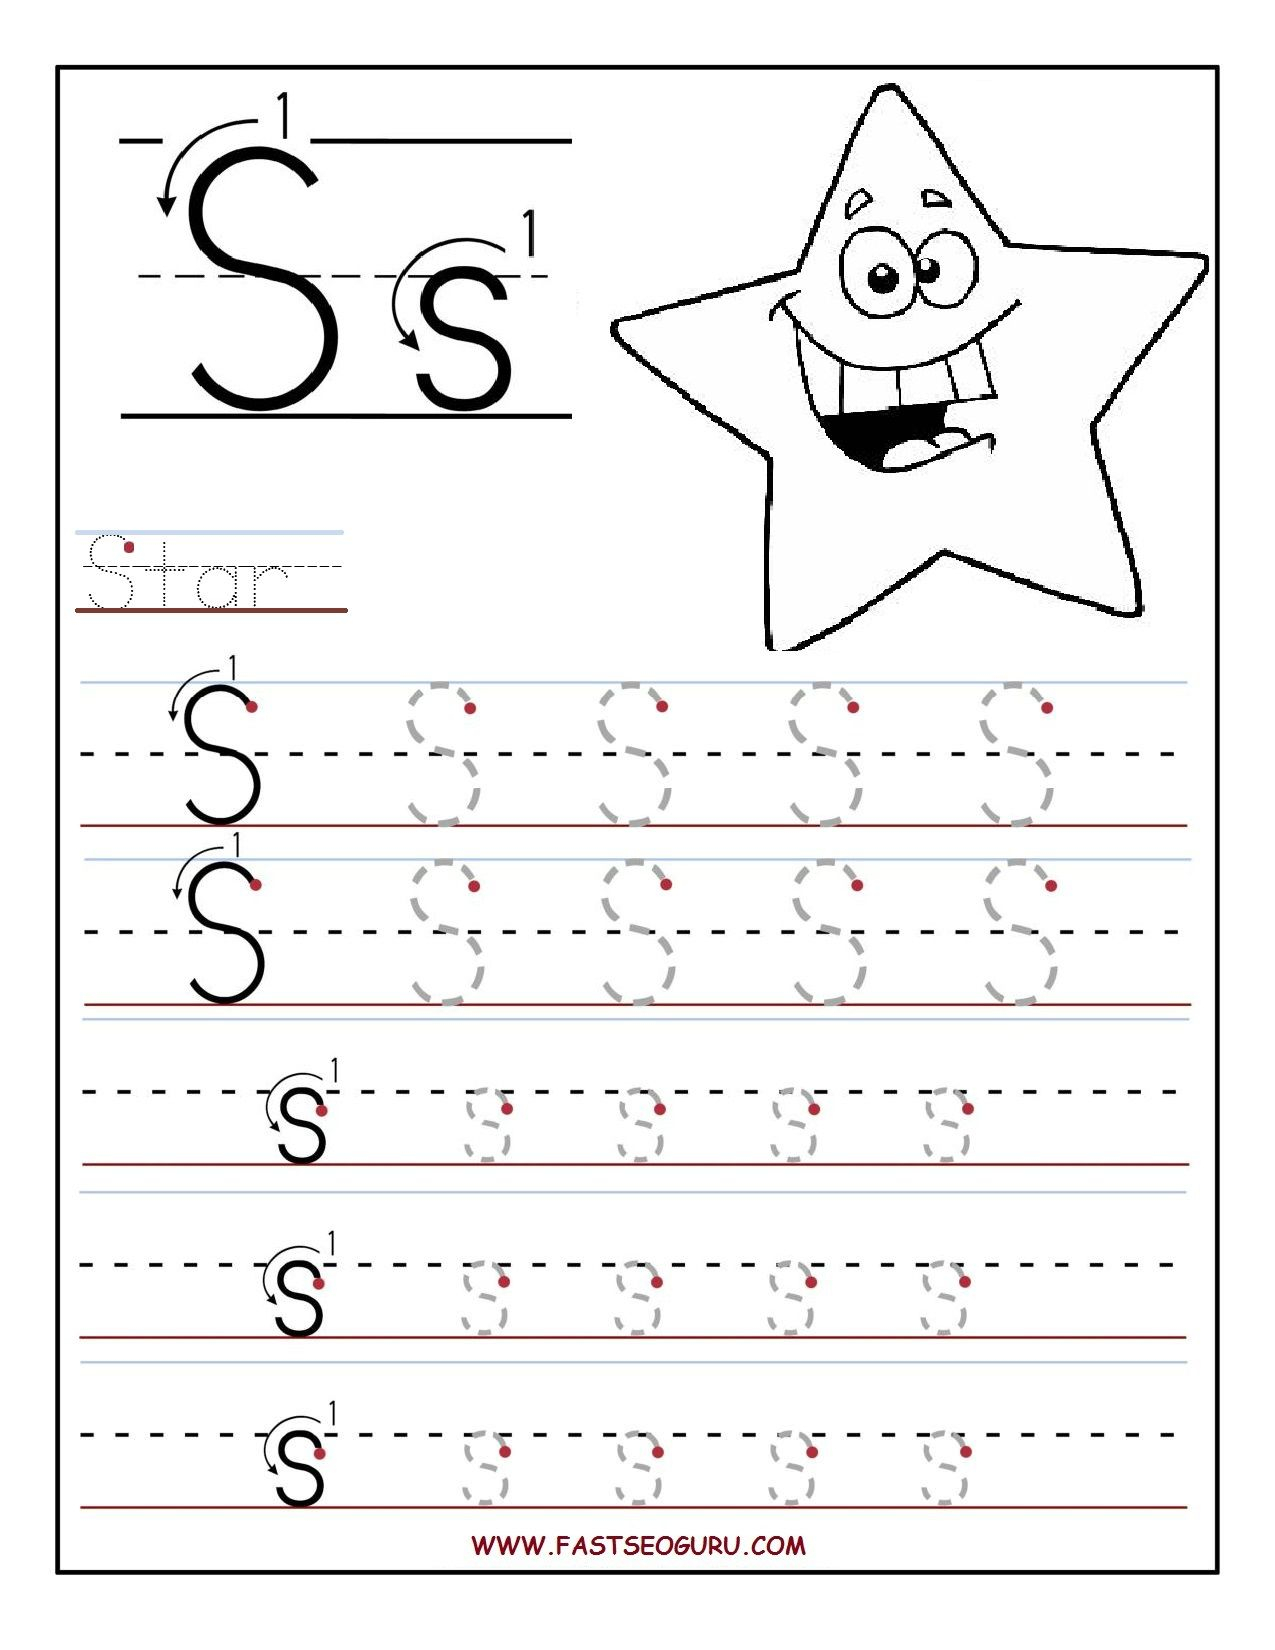 Worksheet ~ Handwriting Practicet Basic Writing Educational intended for Letter Tracing Online Games